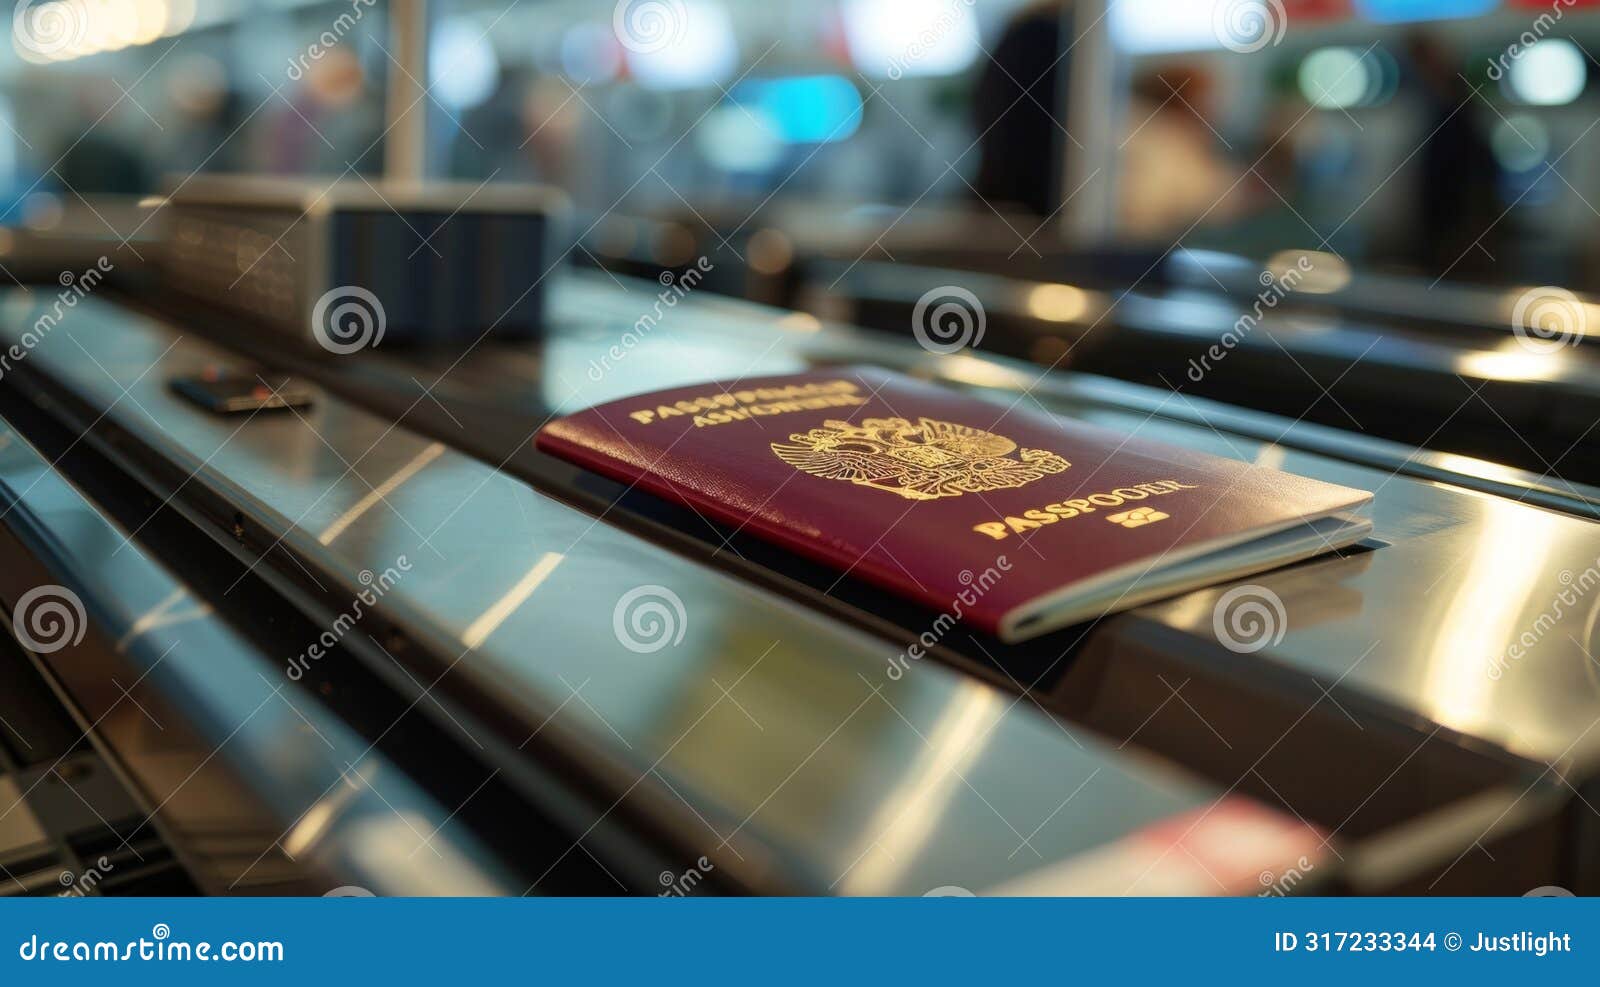 the third image focuses on a closeup view of a passport being scanned by a machine at the id validation station. the